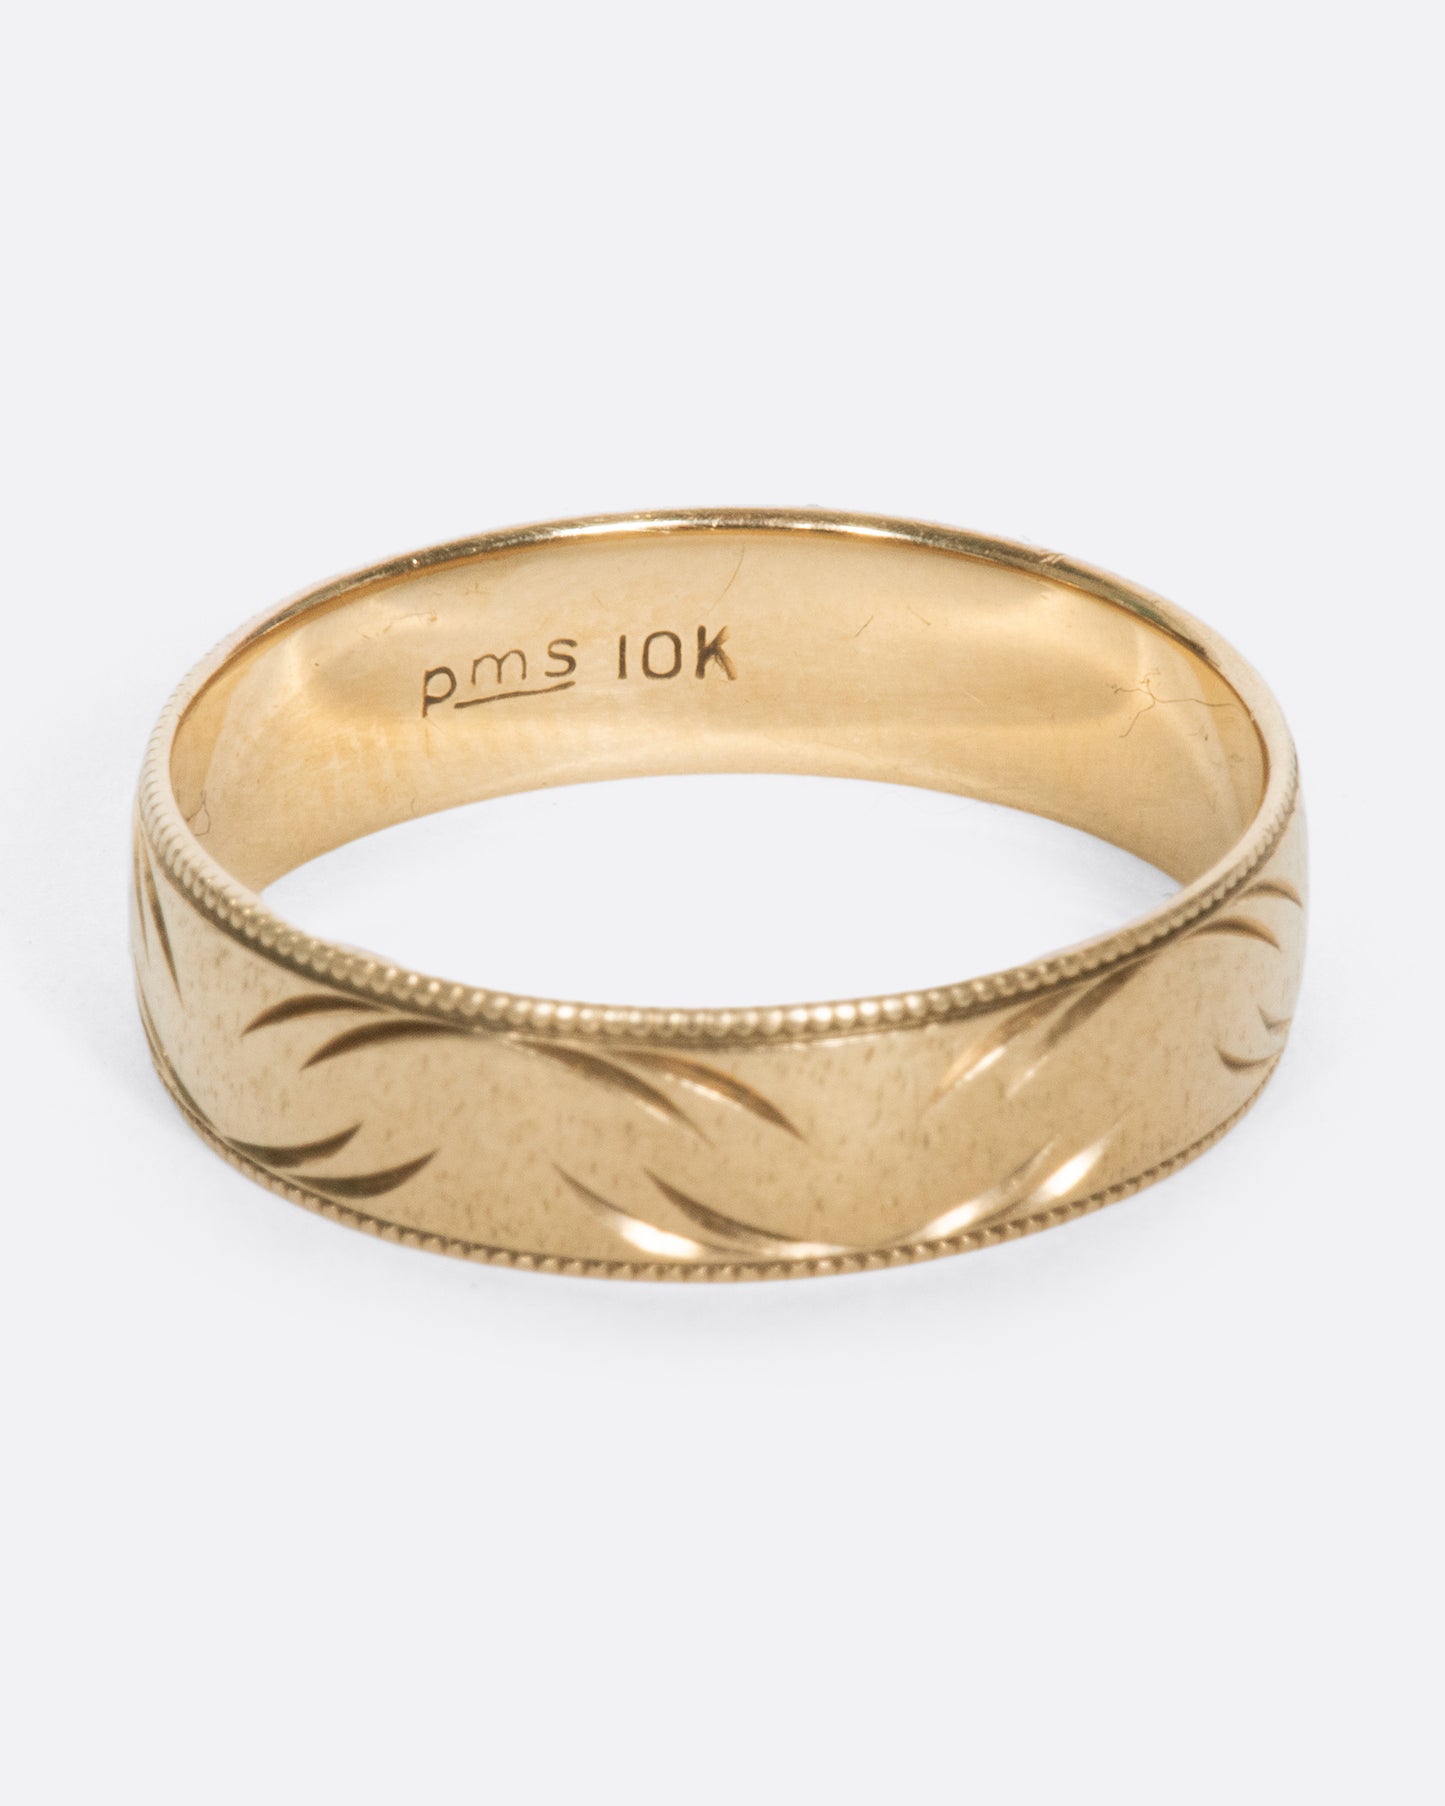 A vintage yellow gold band ring with milgrain edges and semi circular carvings throughout